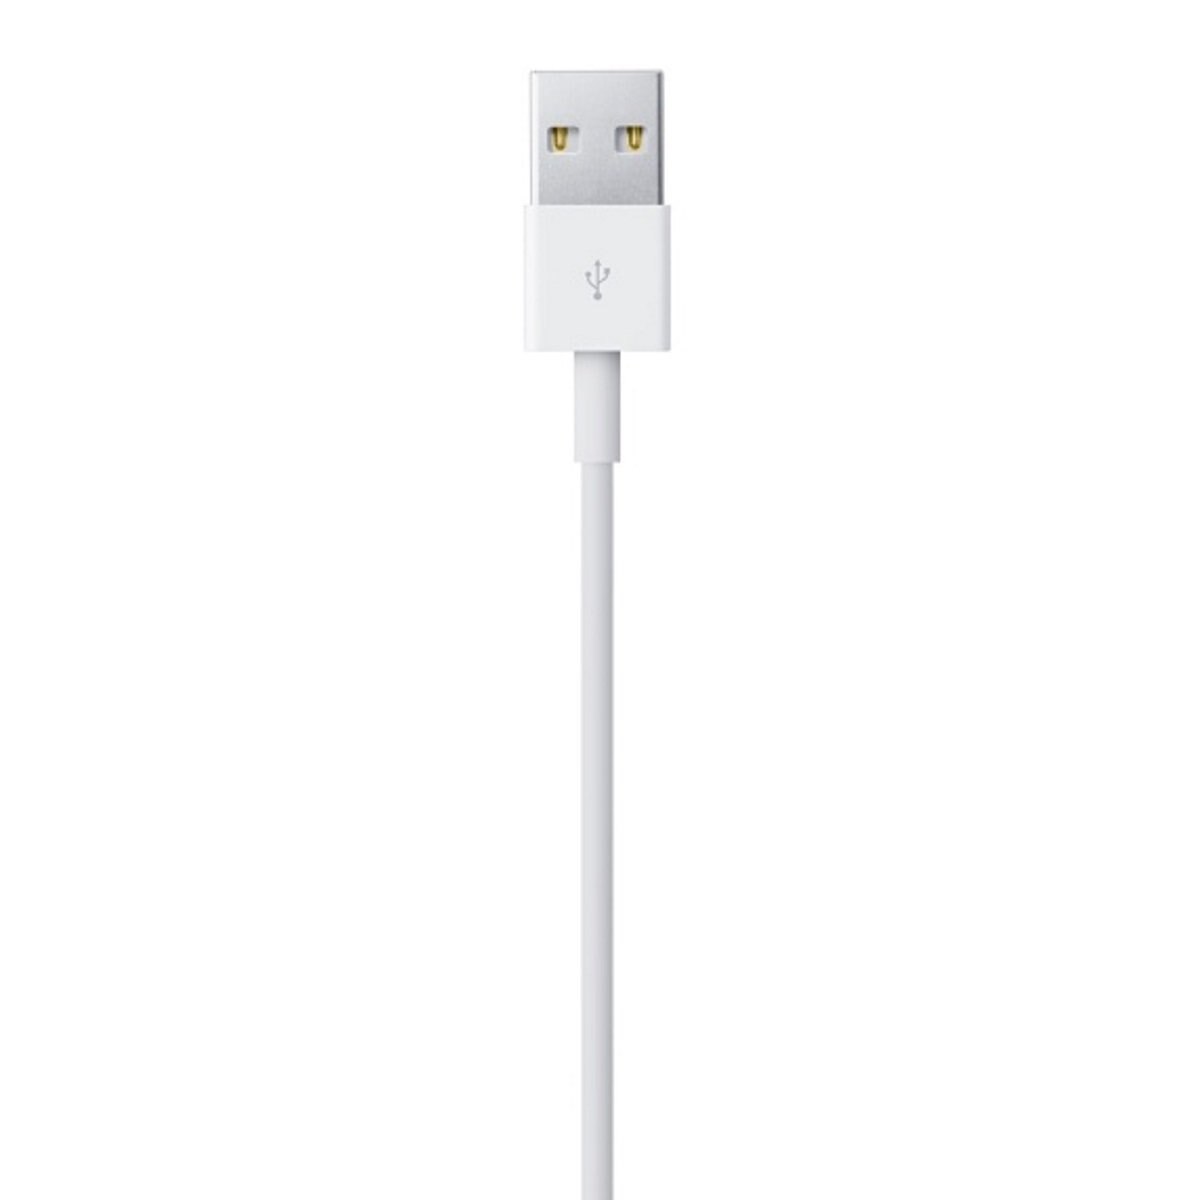 Cable Lightning a Usb 2 Metros